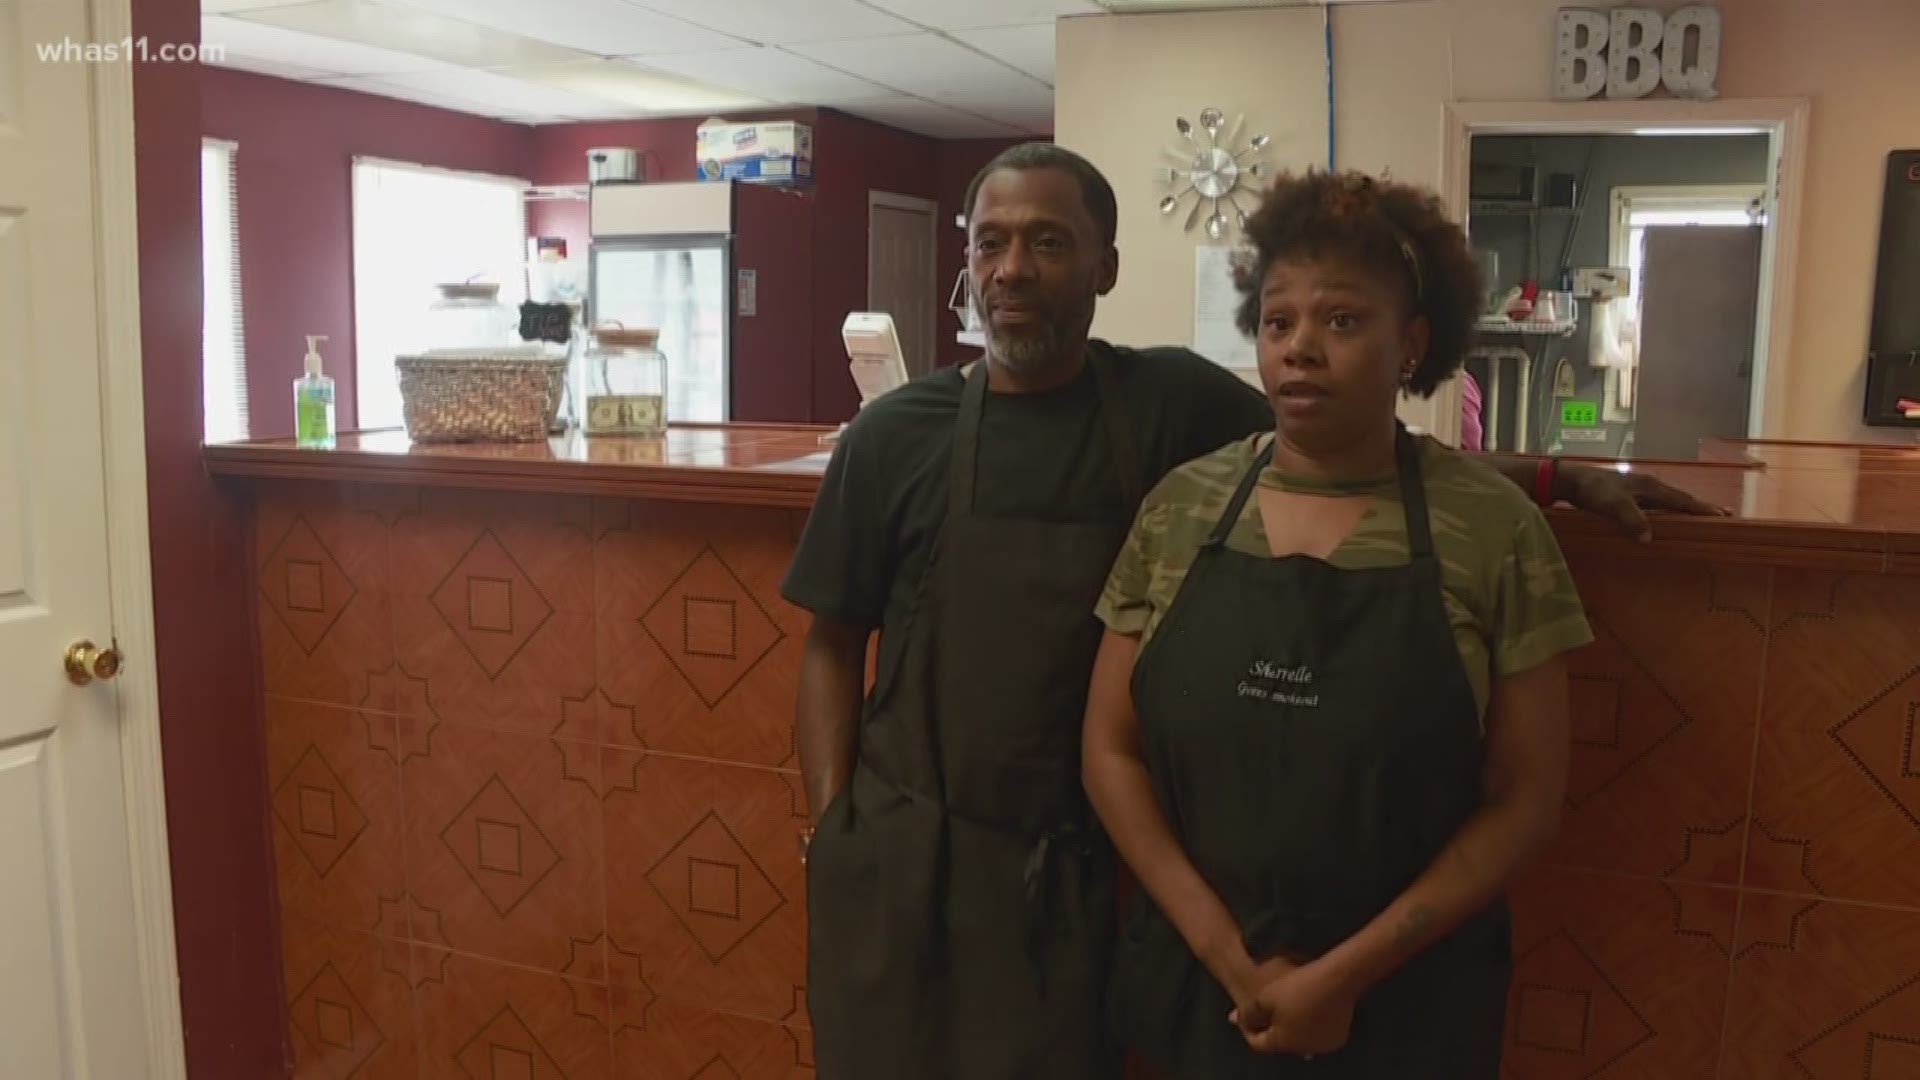 Juneteenth marks the celebration of the end of slavery. A Louisville woman is encouraging people to celebrate the day by supporting local black-owned businesses.